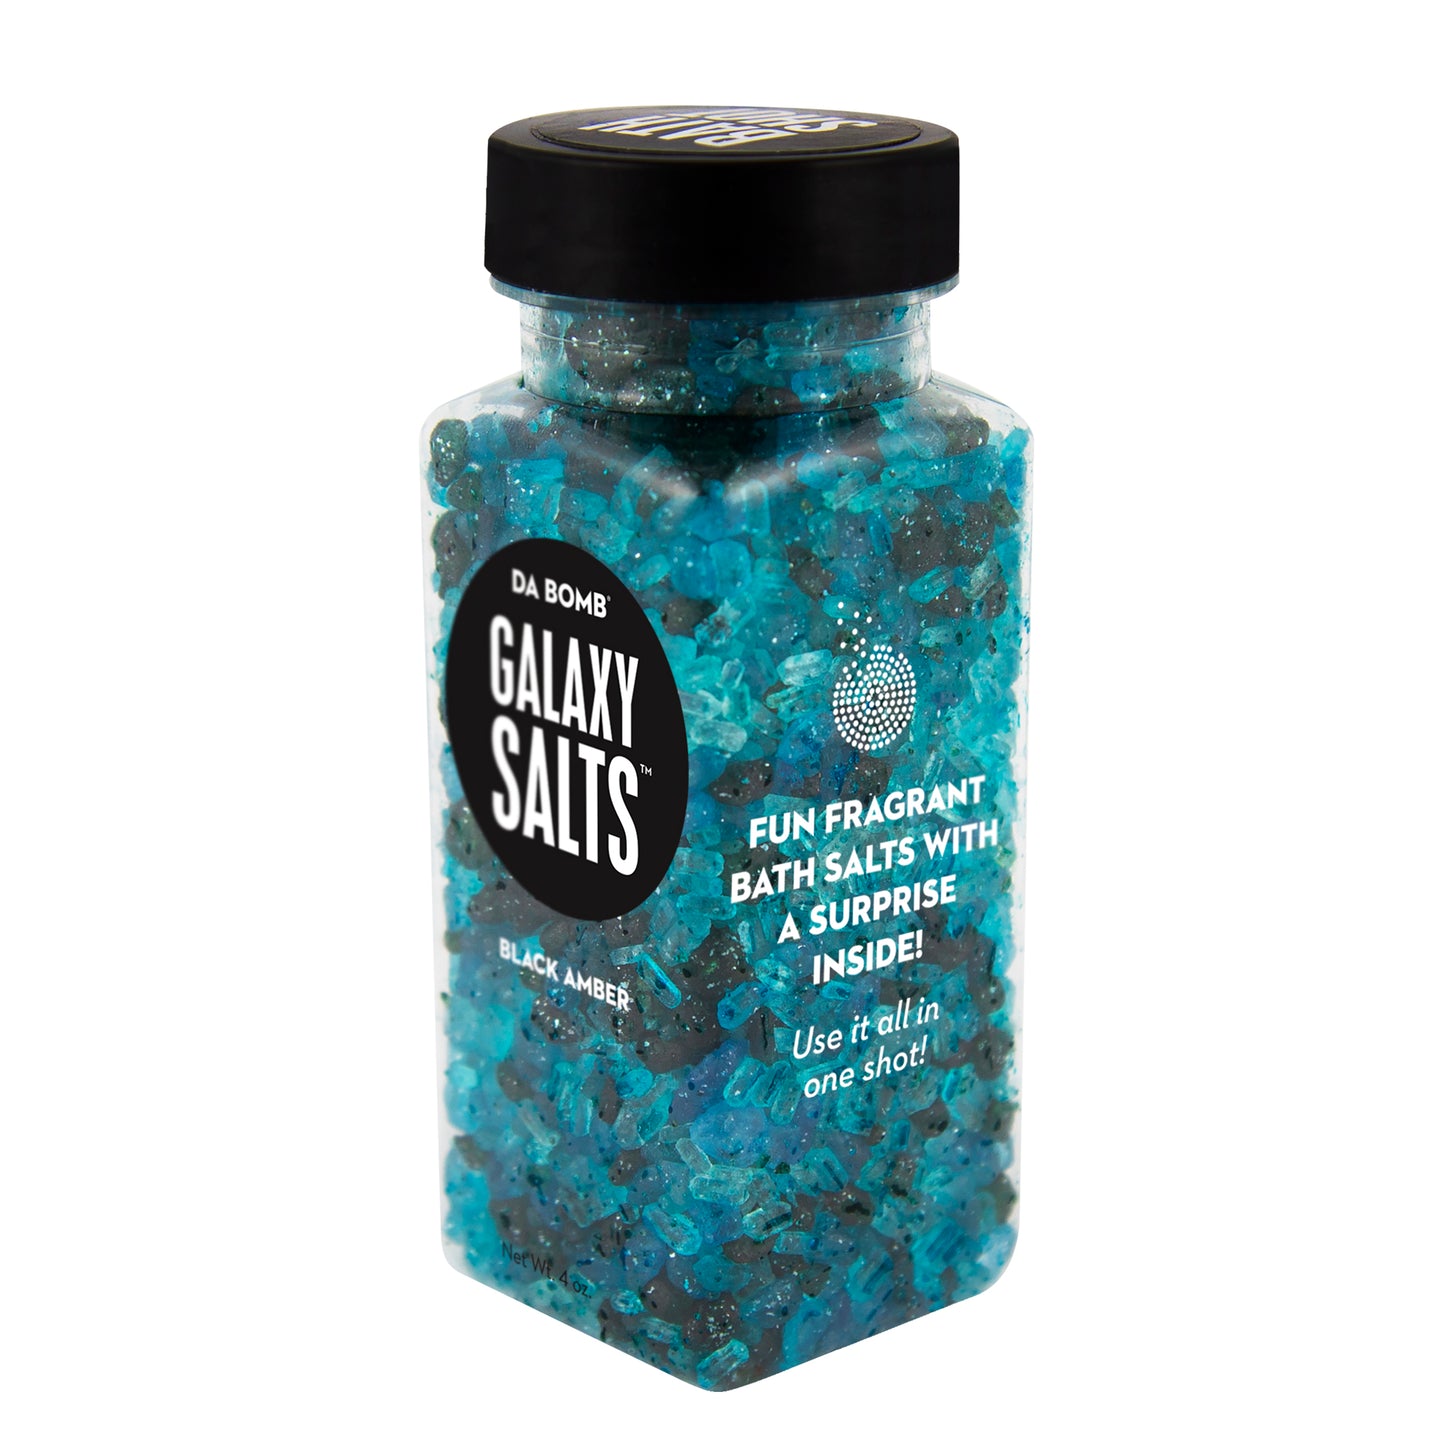 Small, clear plastic jar filled with black, blue and purple bath salt that smells like black amber. Each shot contains a fun surprise.